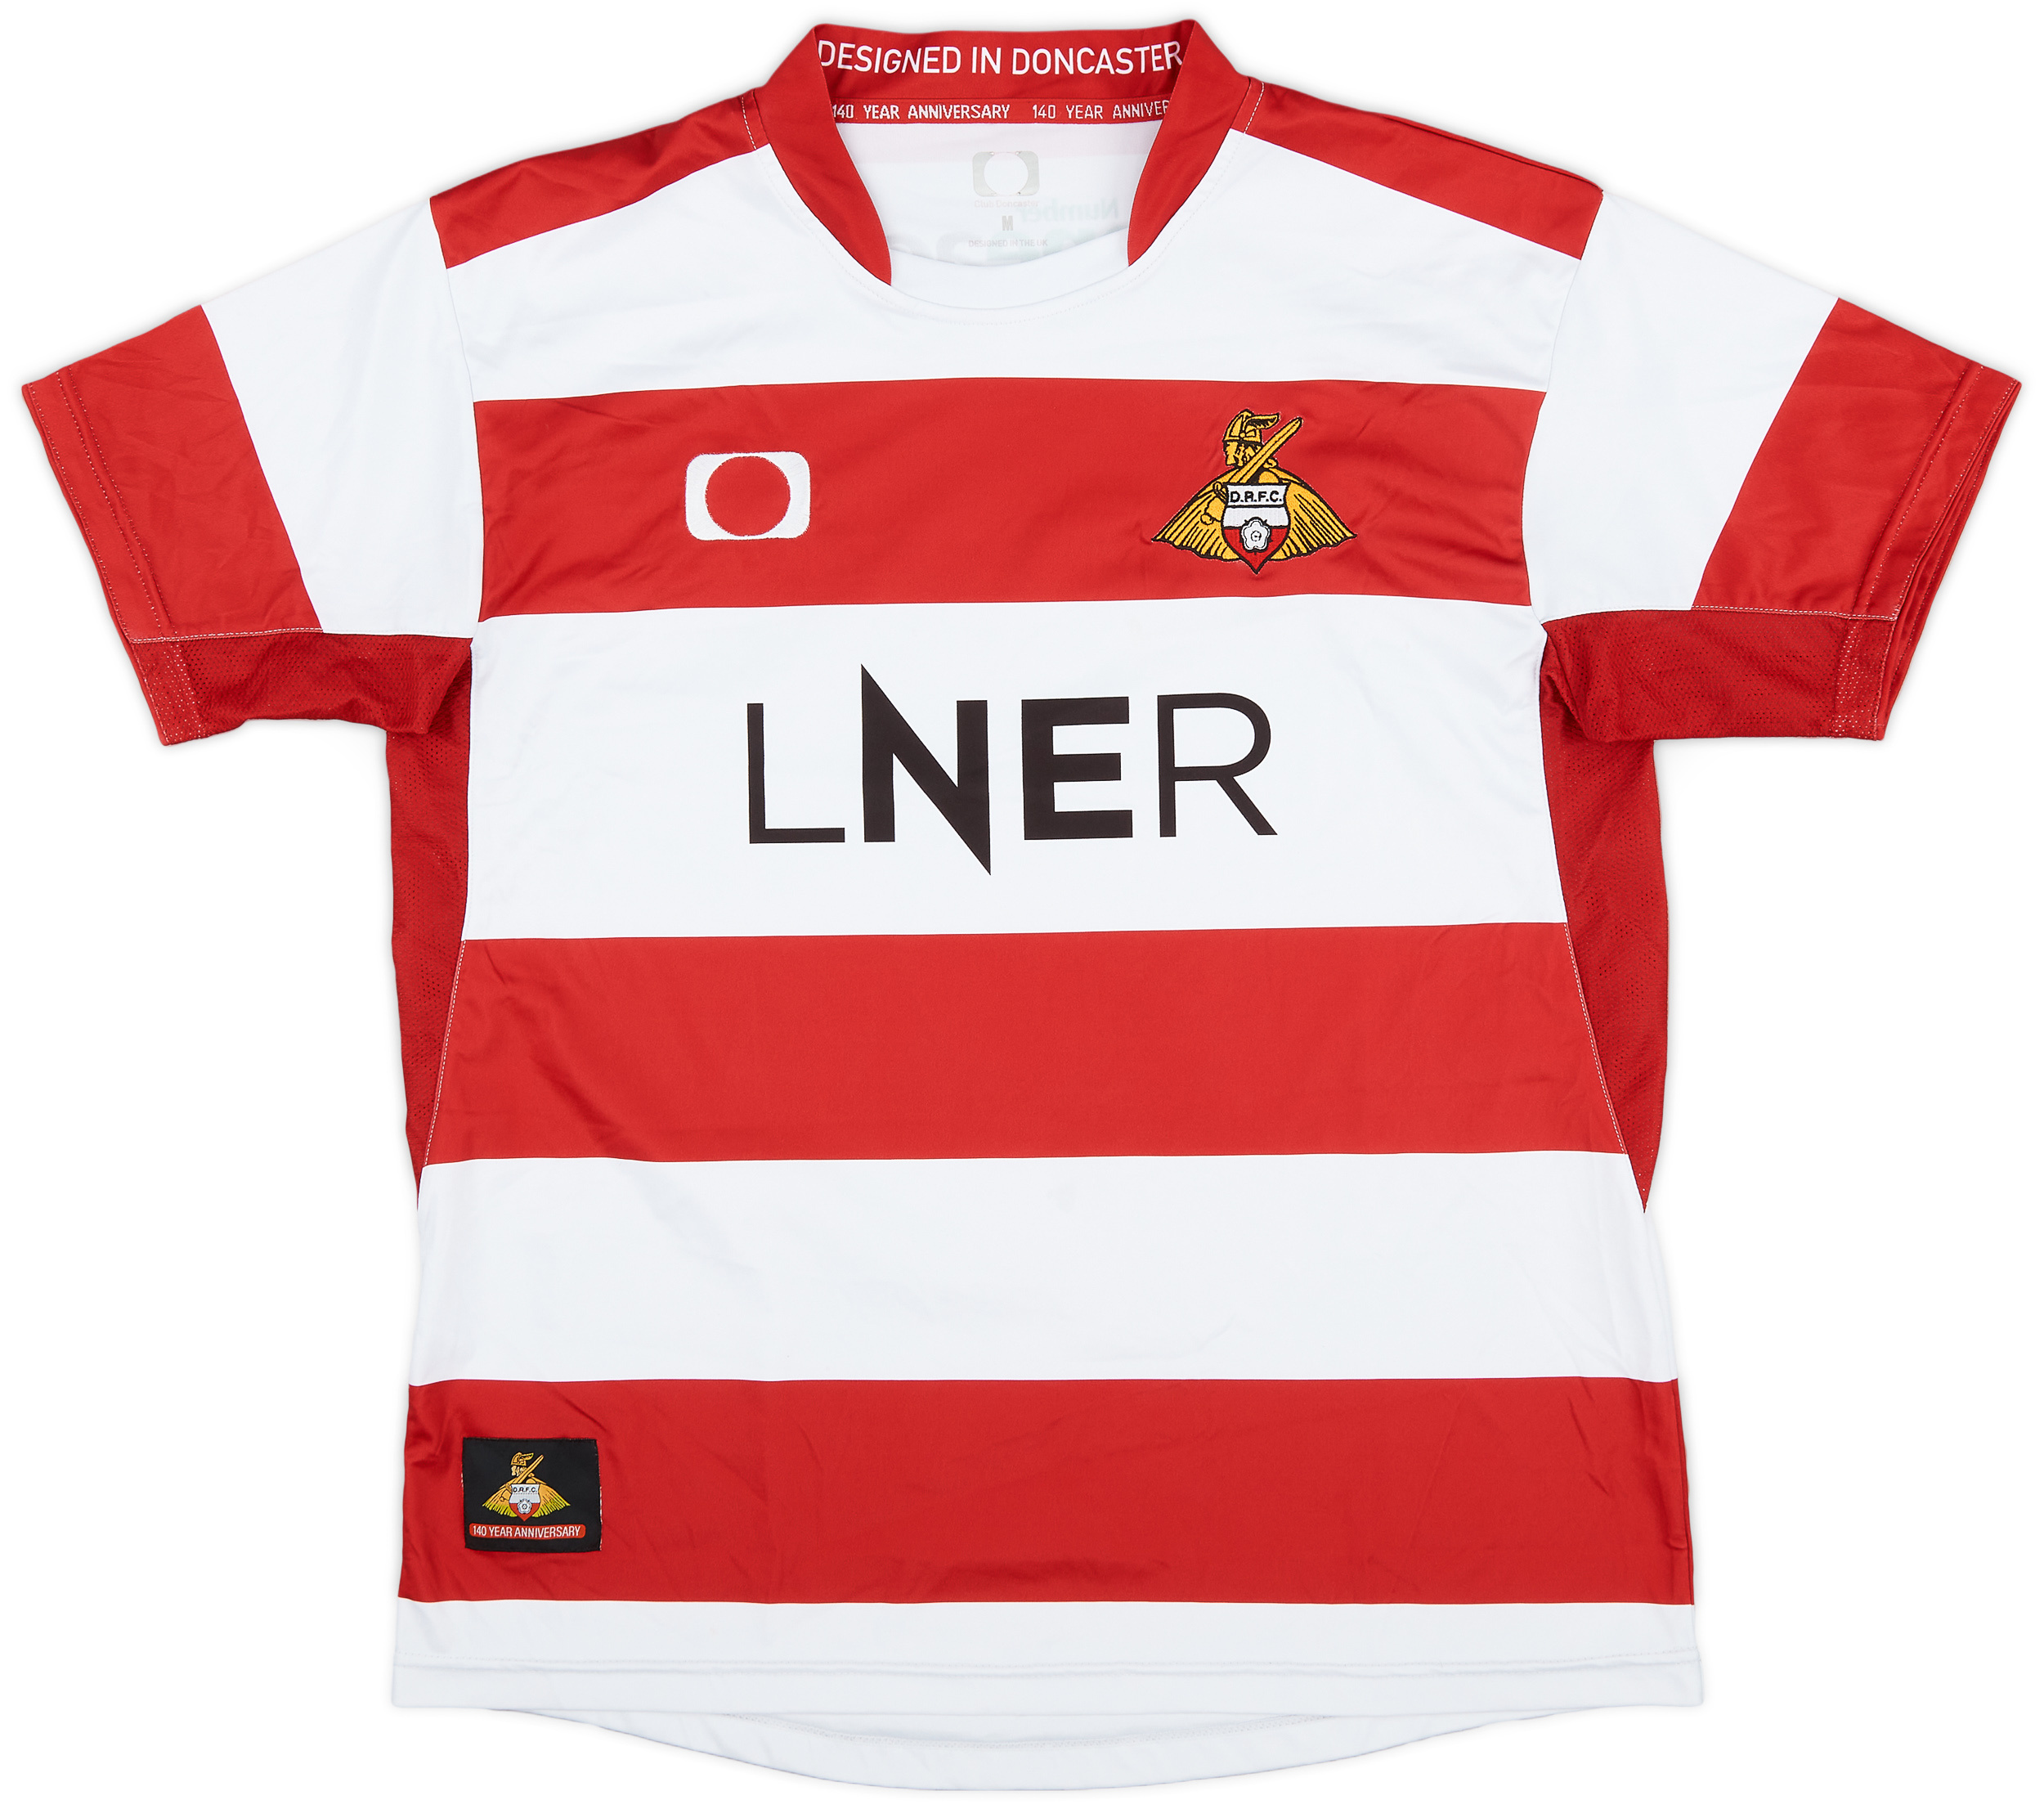 2019-20 Doncaster Rovers Home Shirt - 8/10 - ()